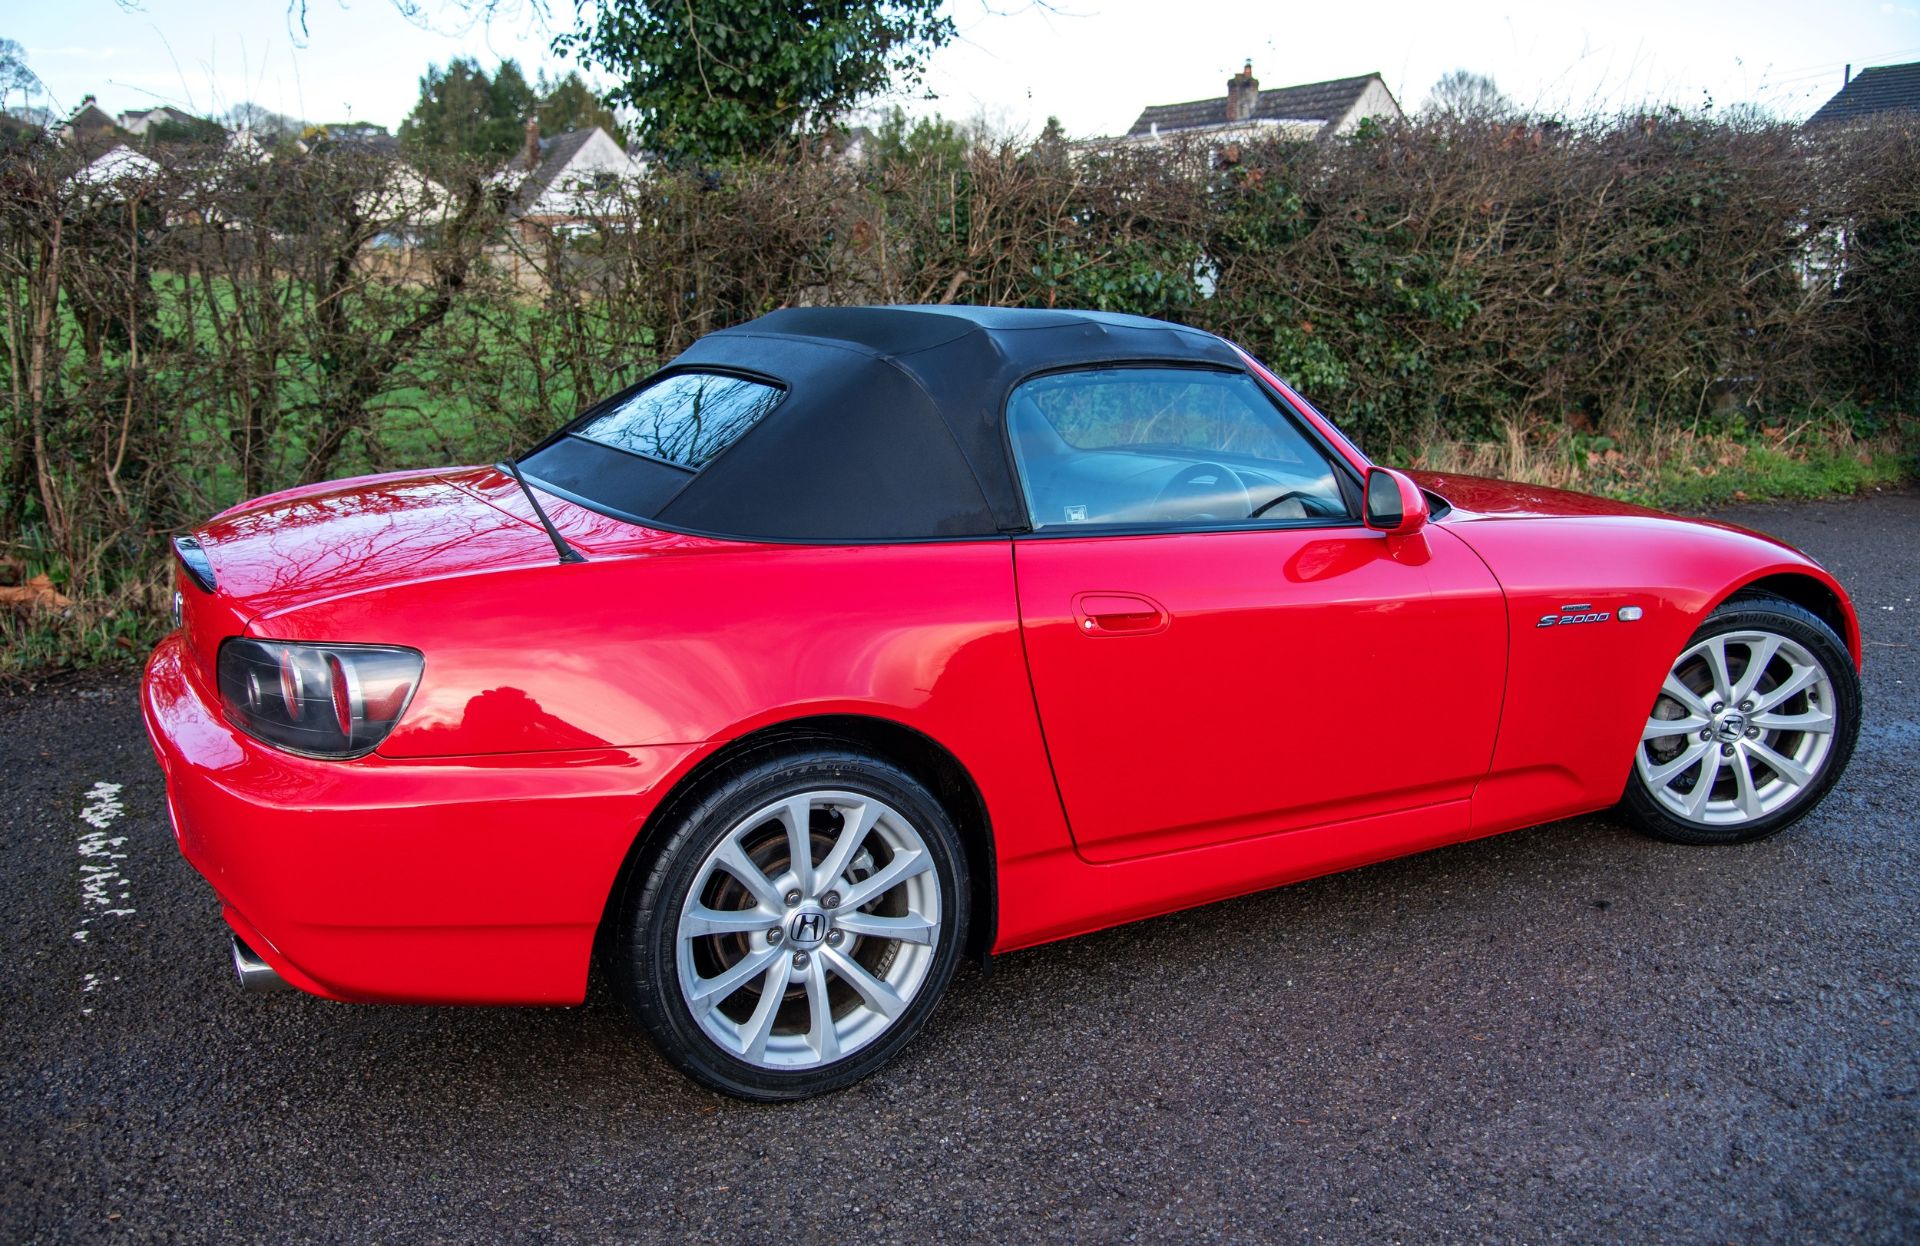 2007 HONDA S2000 Registration Number: WM07 JAU Chassis Number: JHMAP11207S200009 Recorded Mileage: - Image 8 of 26